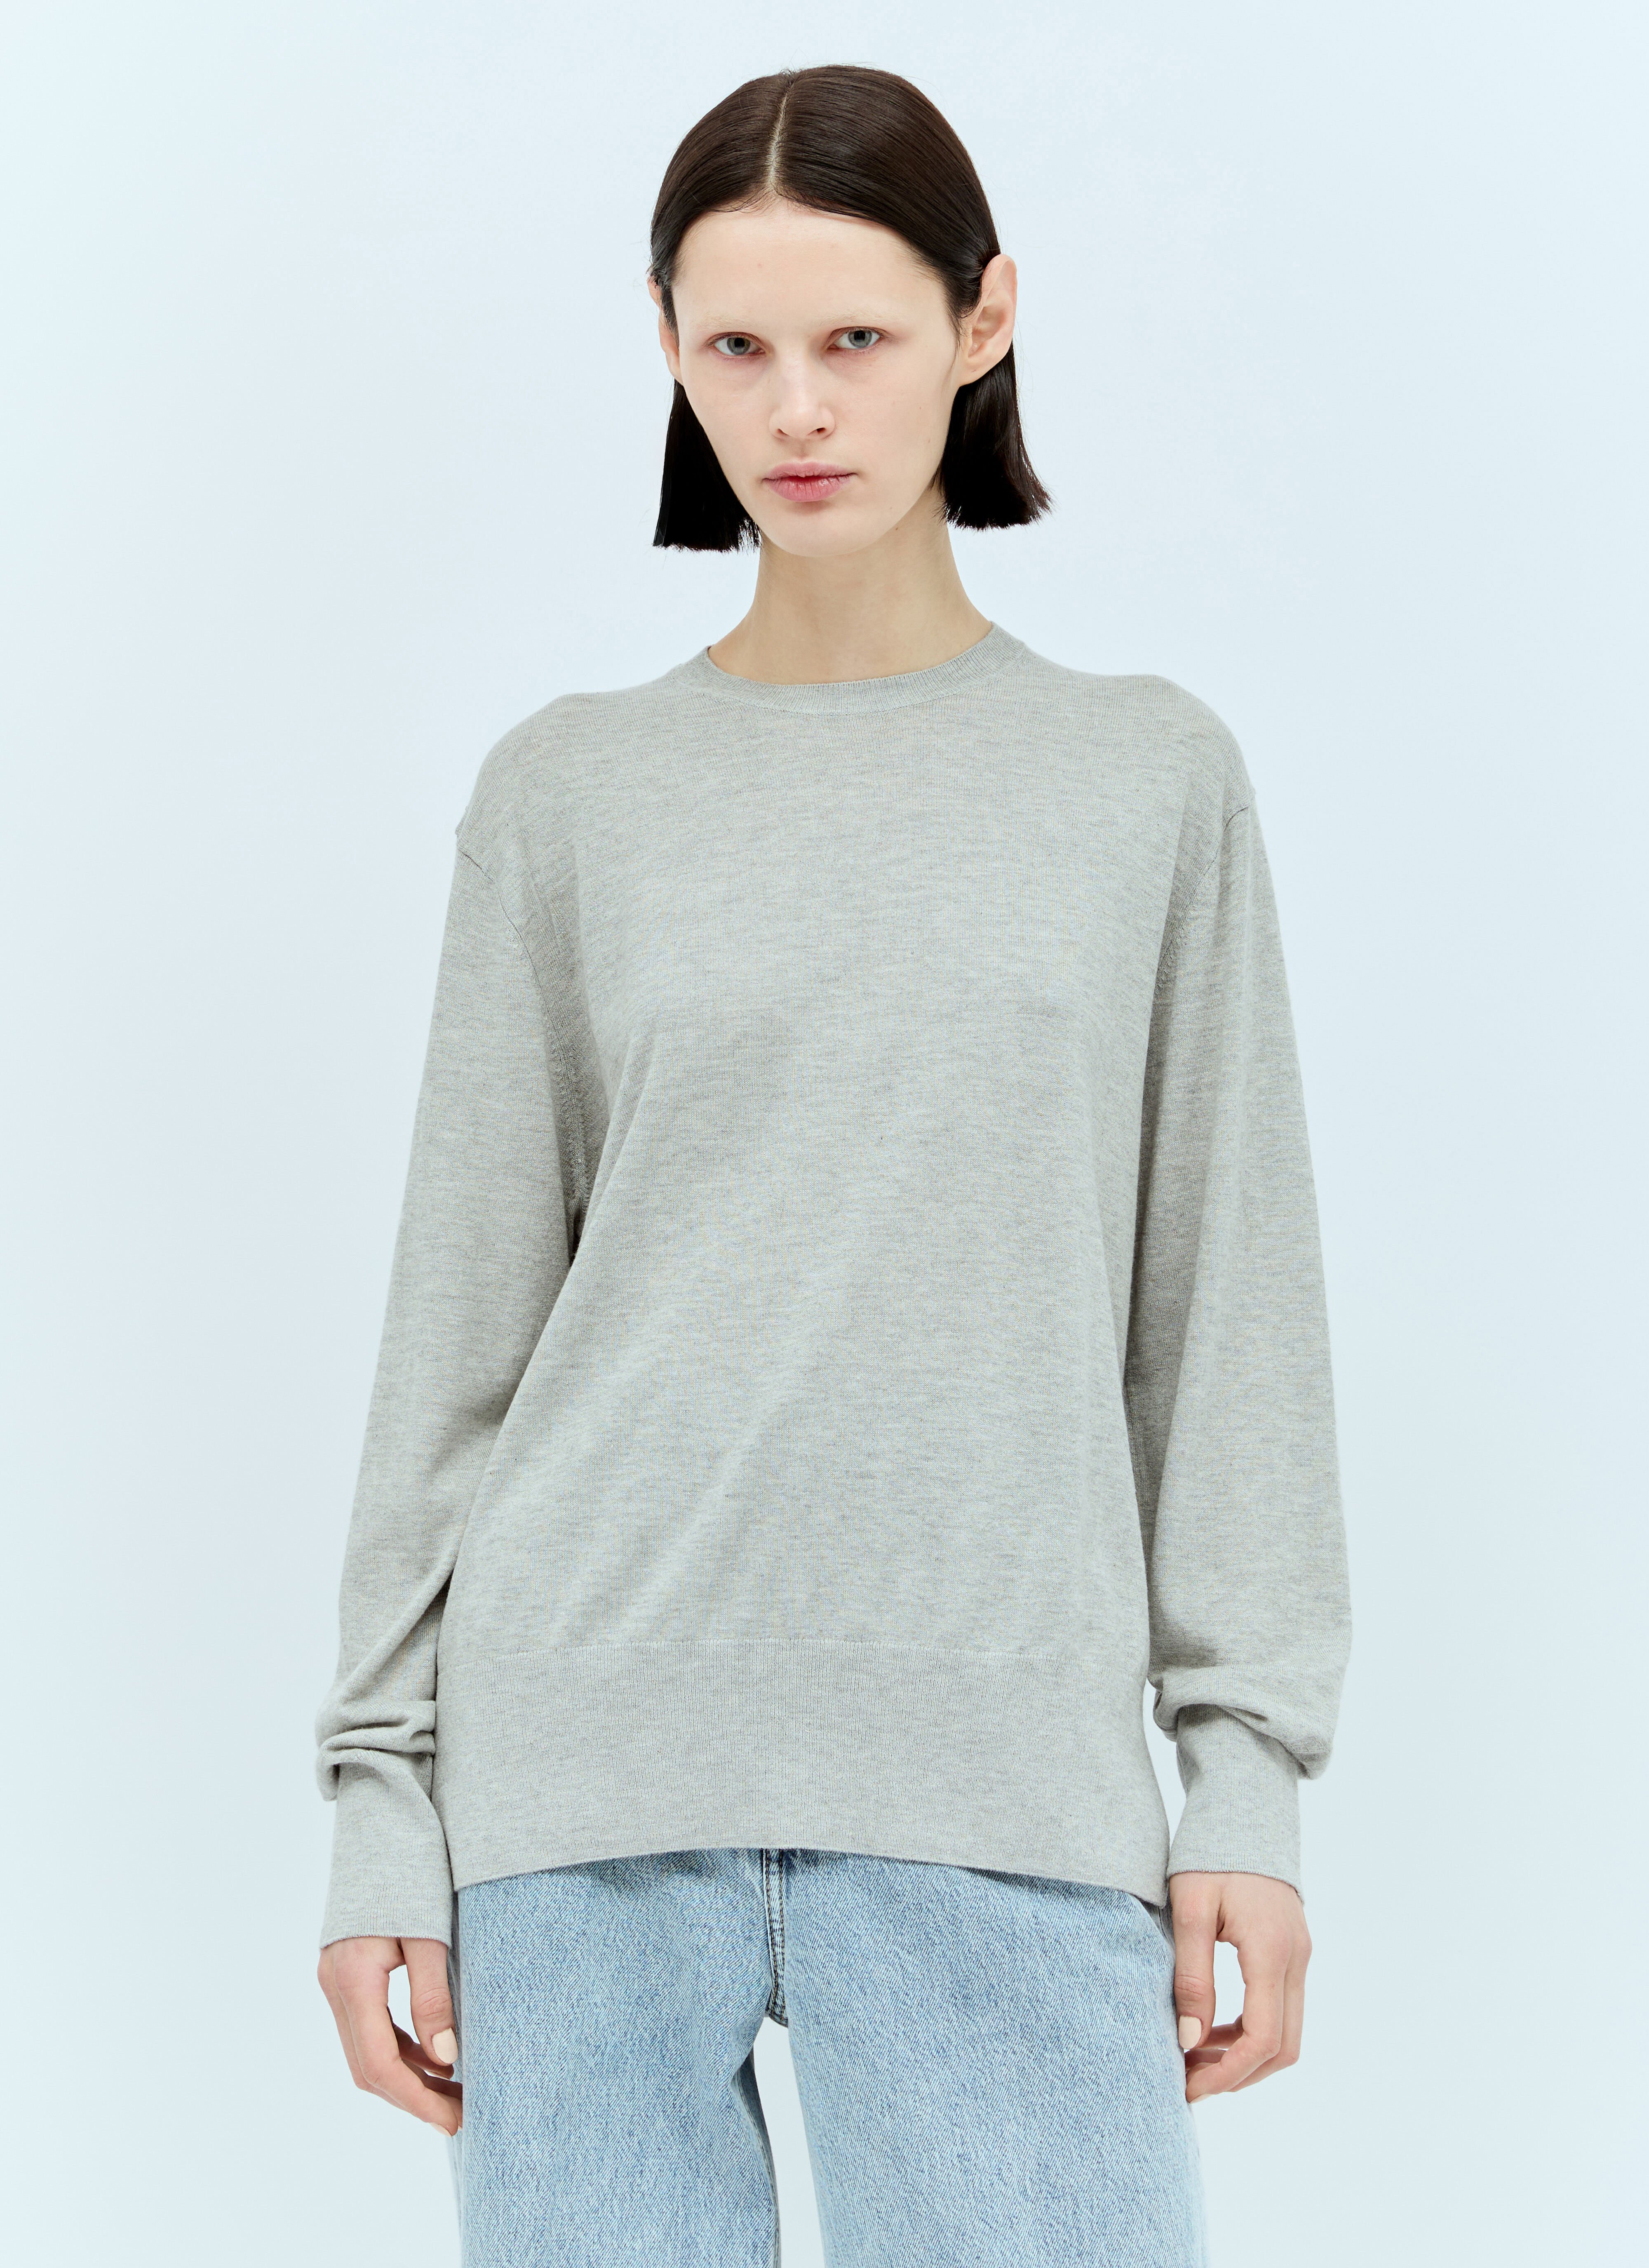 TOTEME Sik Cashmere Knit Sweater Grey tot0257029